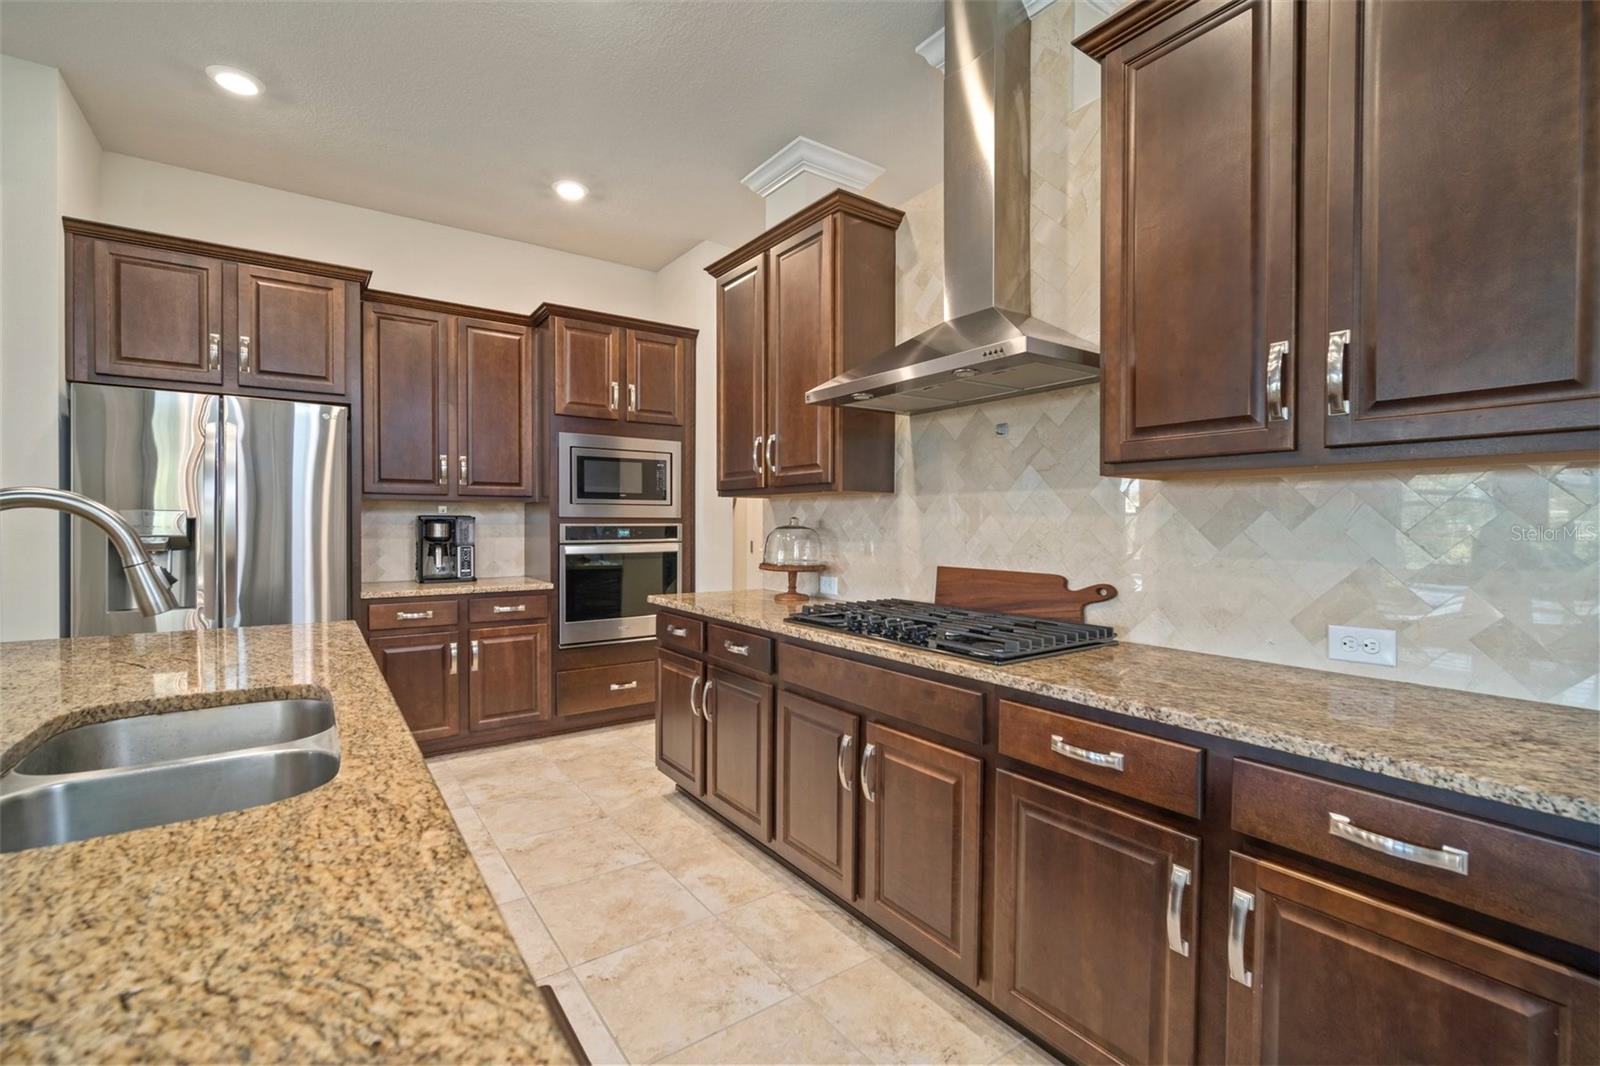 Gourmet Kitchen with gas cooktop